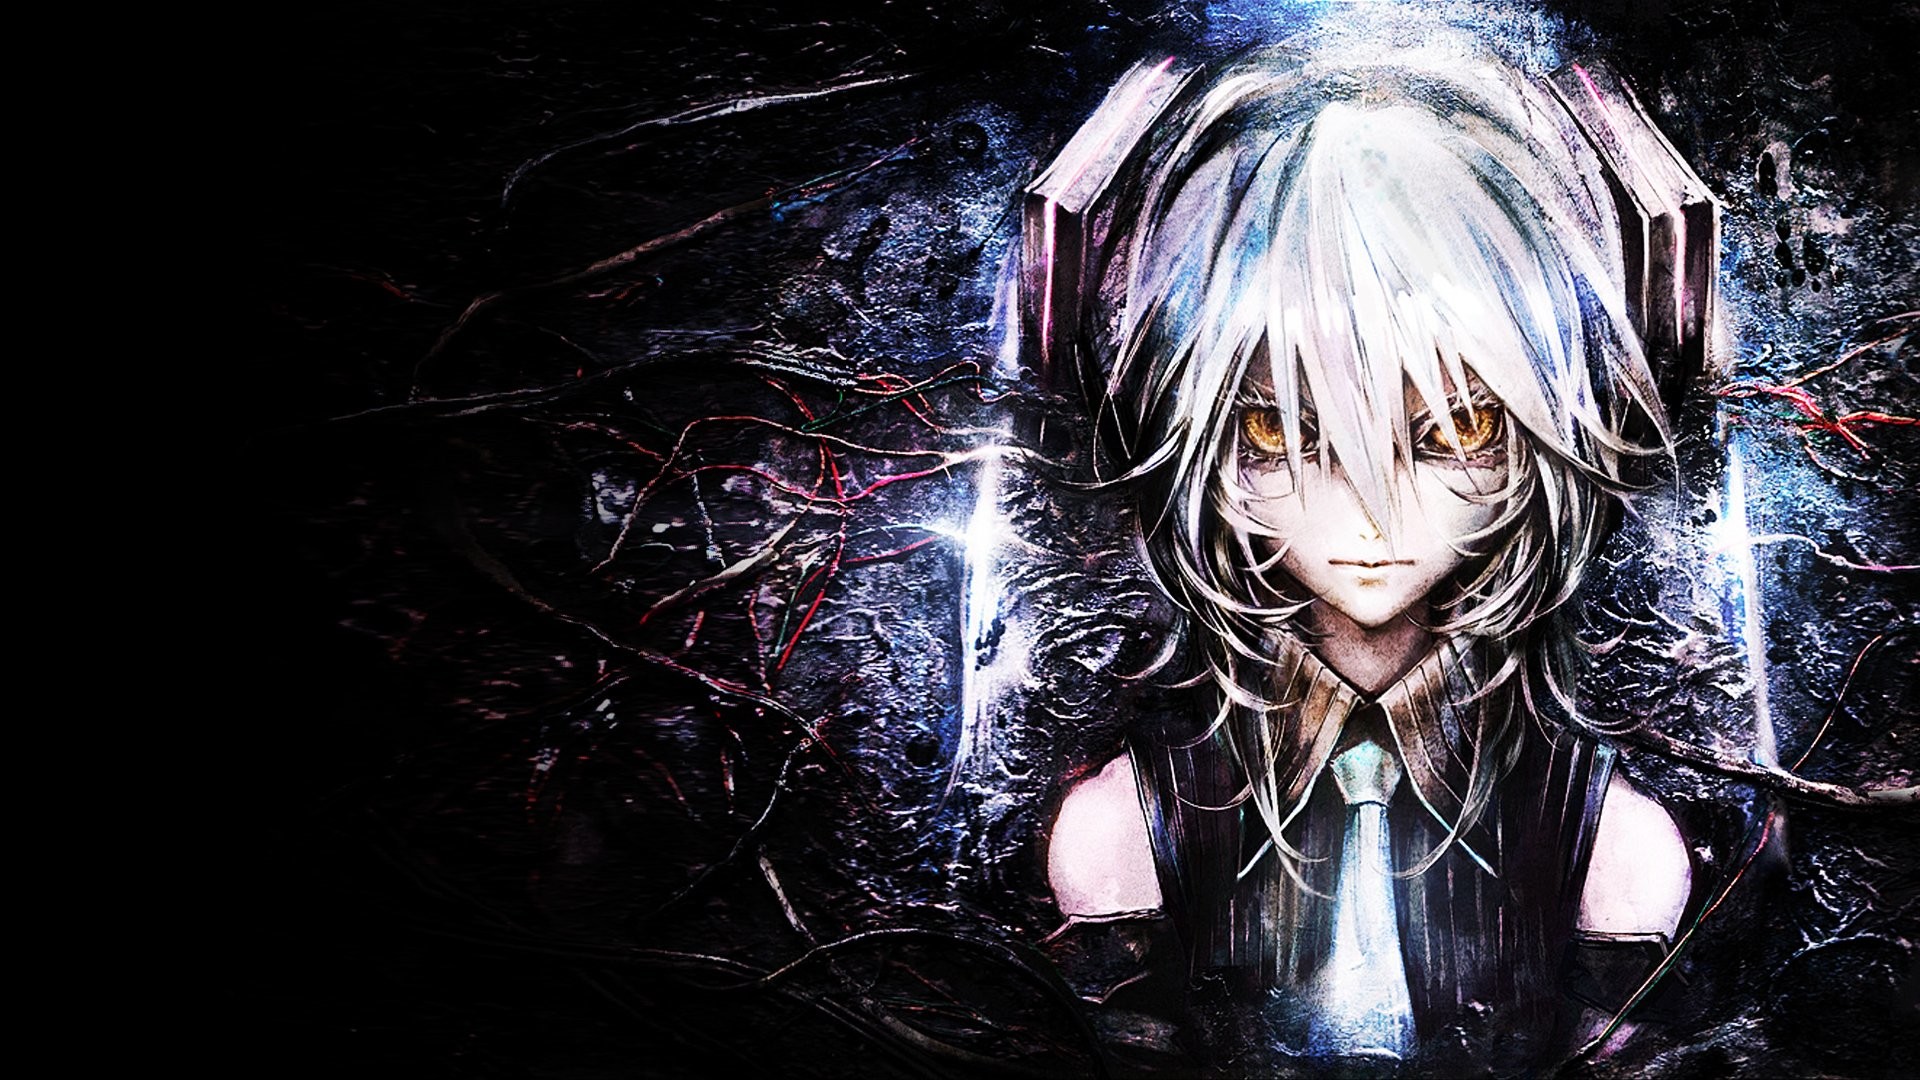 HD Wallpaper Background ID82284. Anime Vocaloid